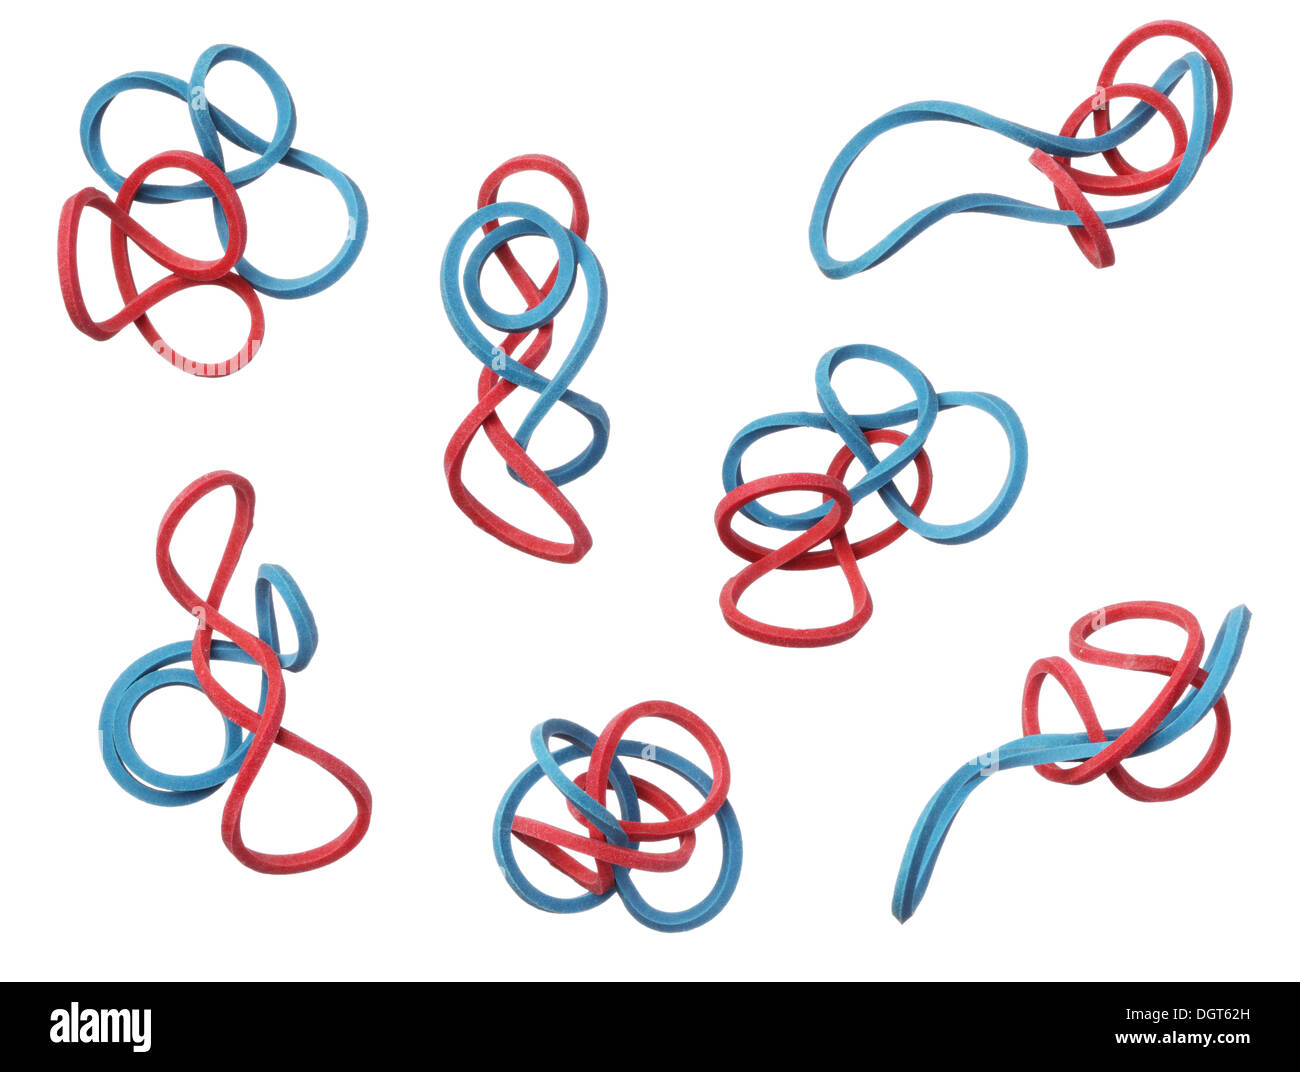 Red and blue elastic rubber bands isolated on a white background Stock Photo